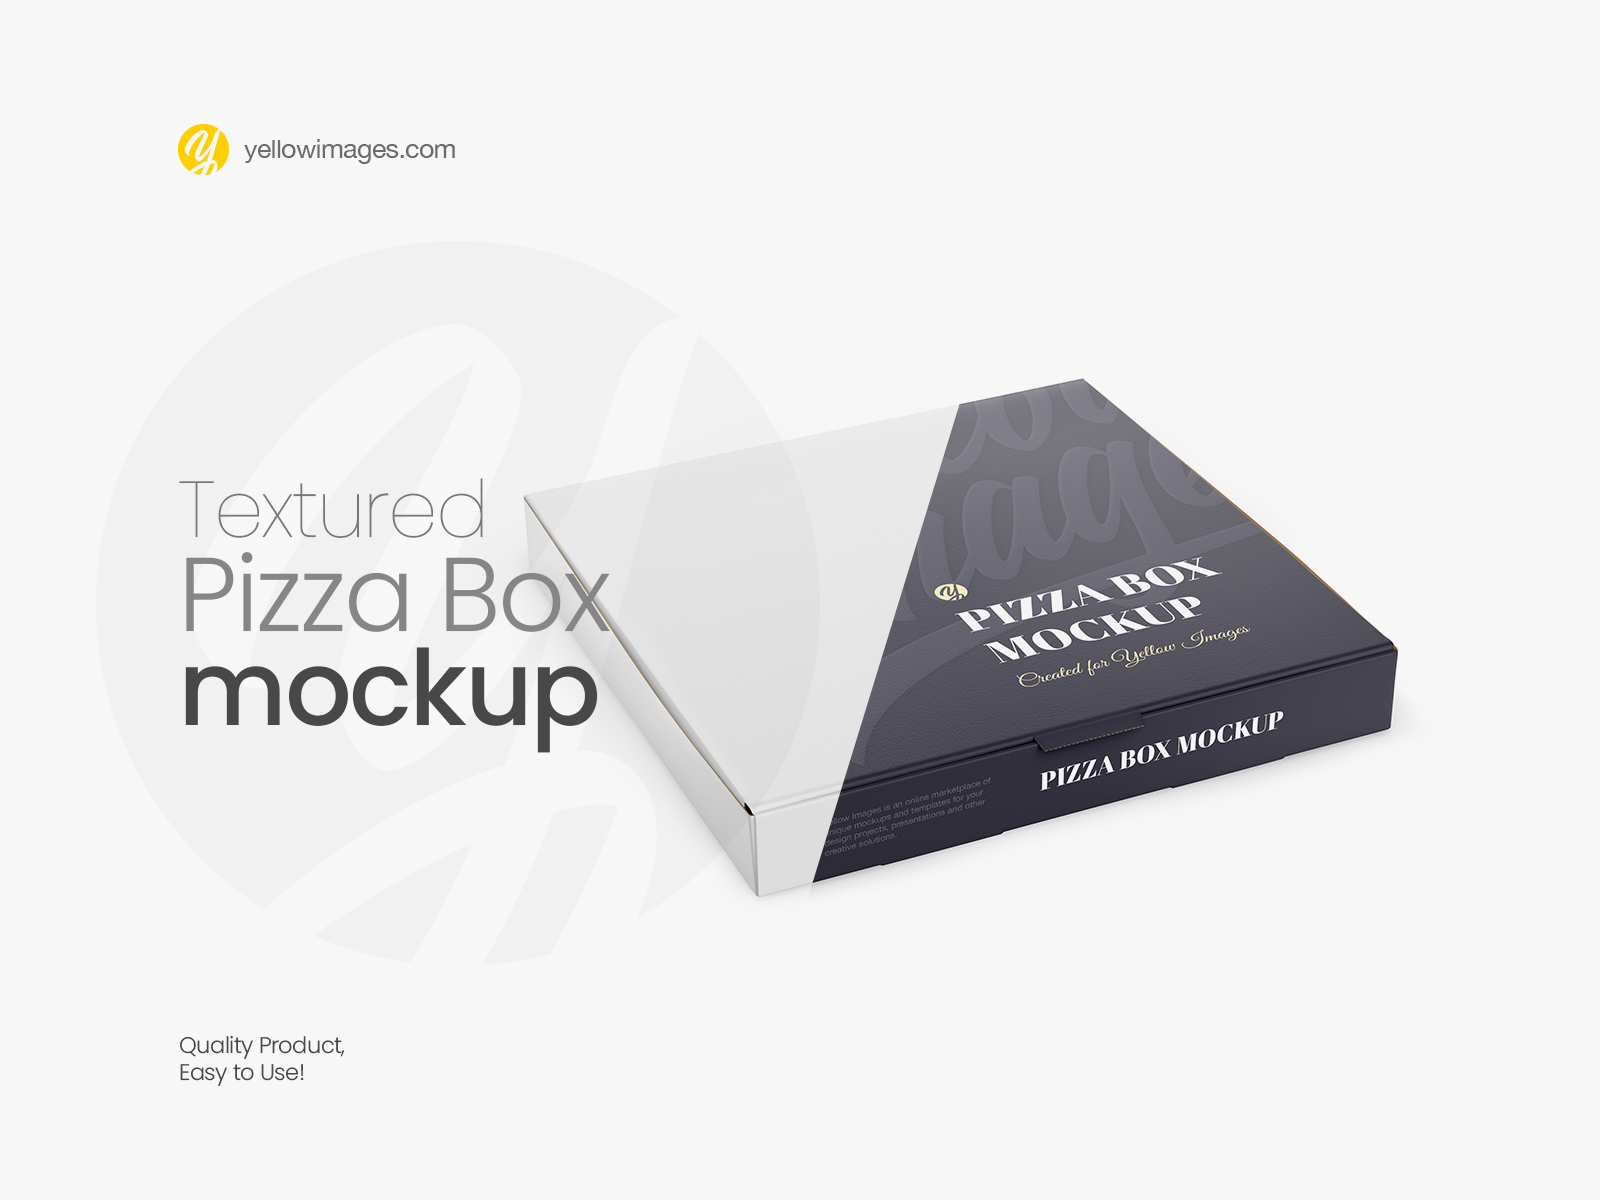 Download Pizza Box Mockup Psd Download Free And Premium Psd Mockup Templates And Design Assets PSD Mockup Templates